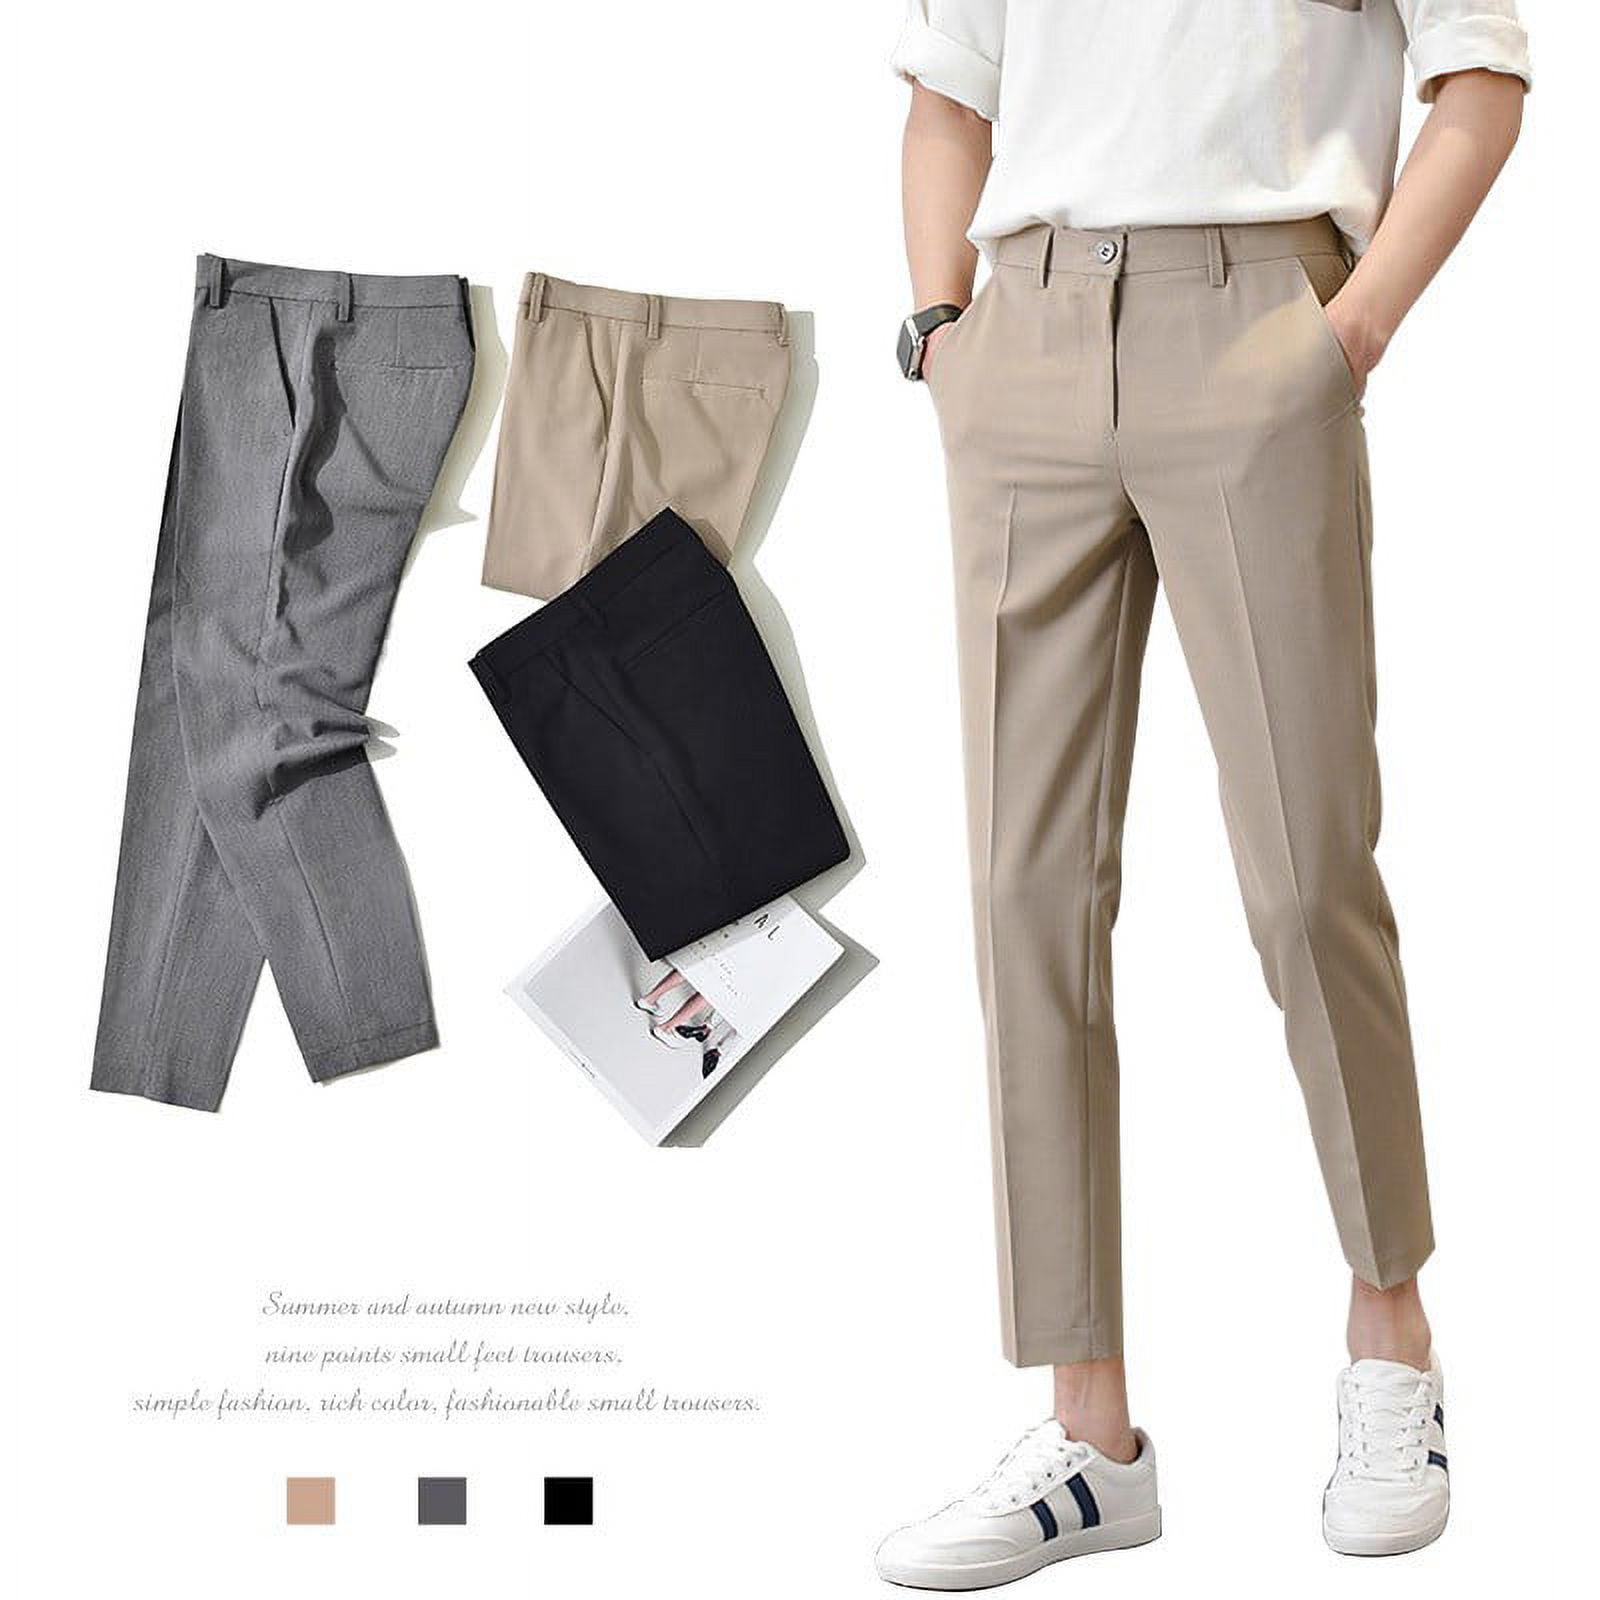 MEN'S COLORED SLIM FIT PANTS HIGH QUALITY #